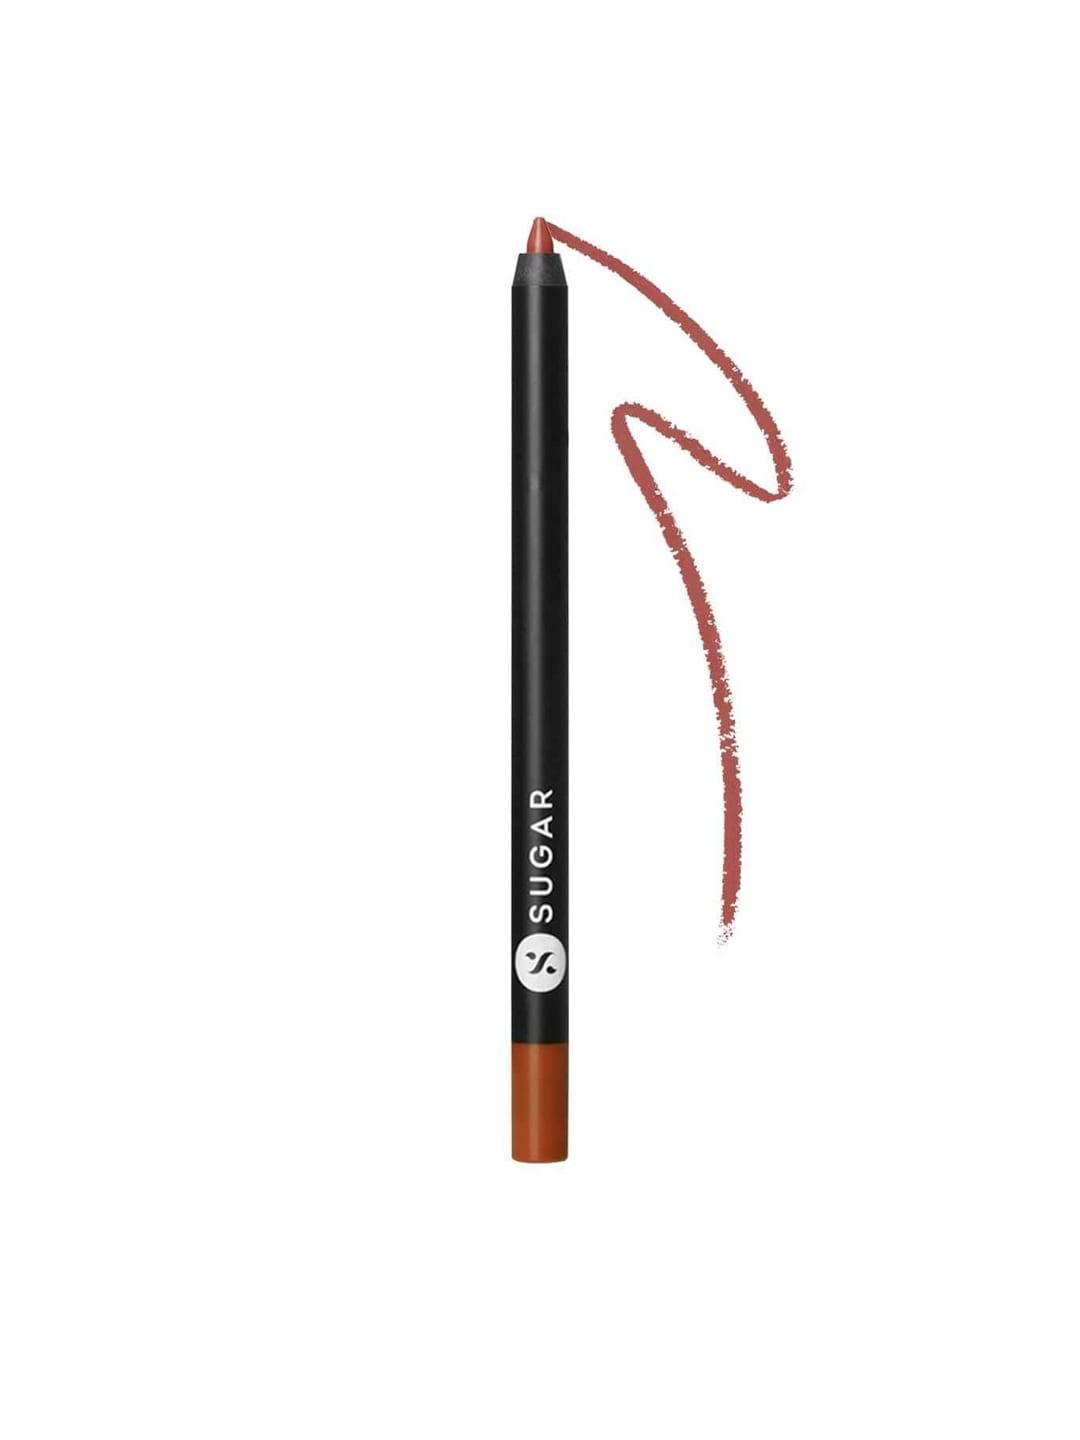 sugar lipping on the edge hydrating lip liner with sharpner 1.2 g - wooed by nude 02